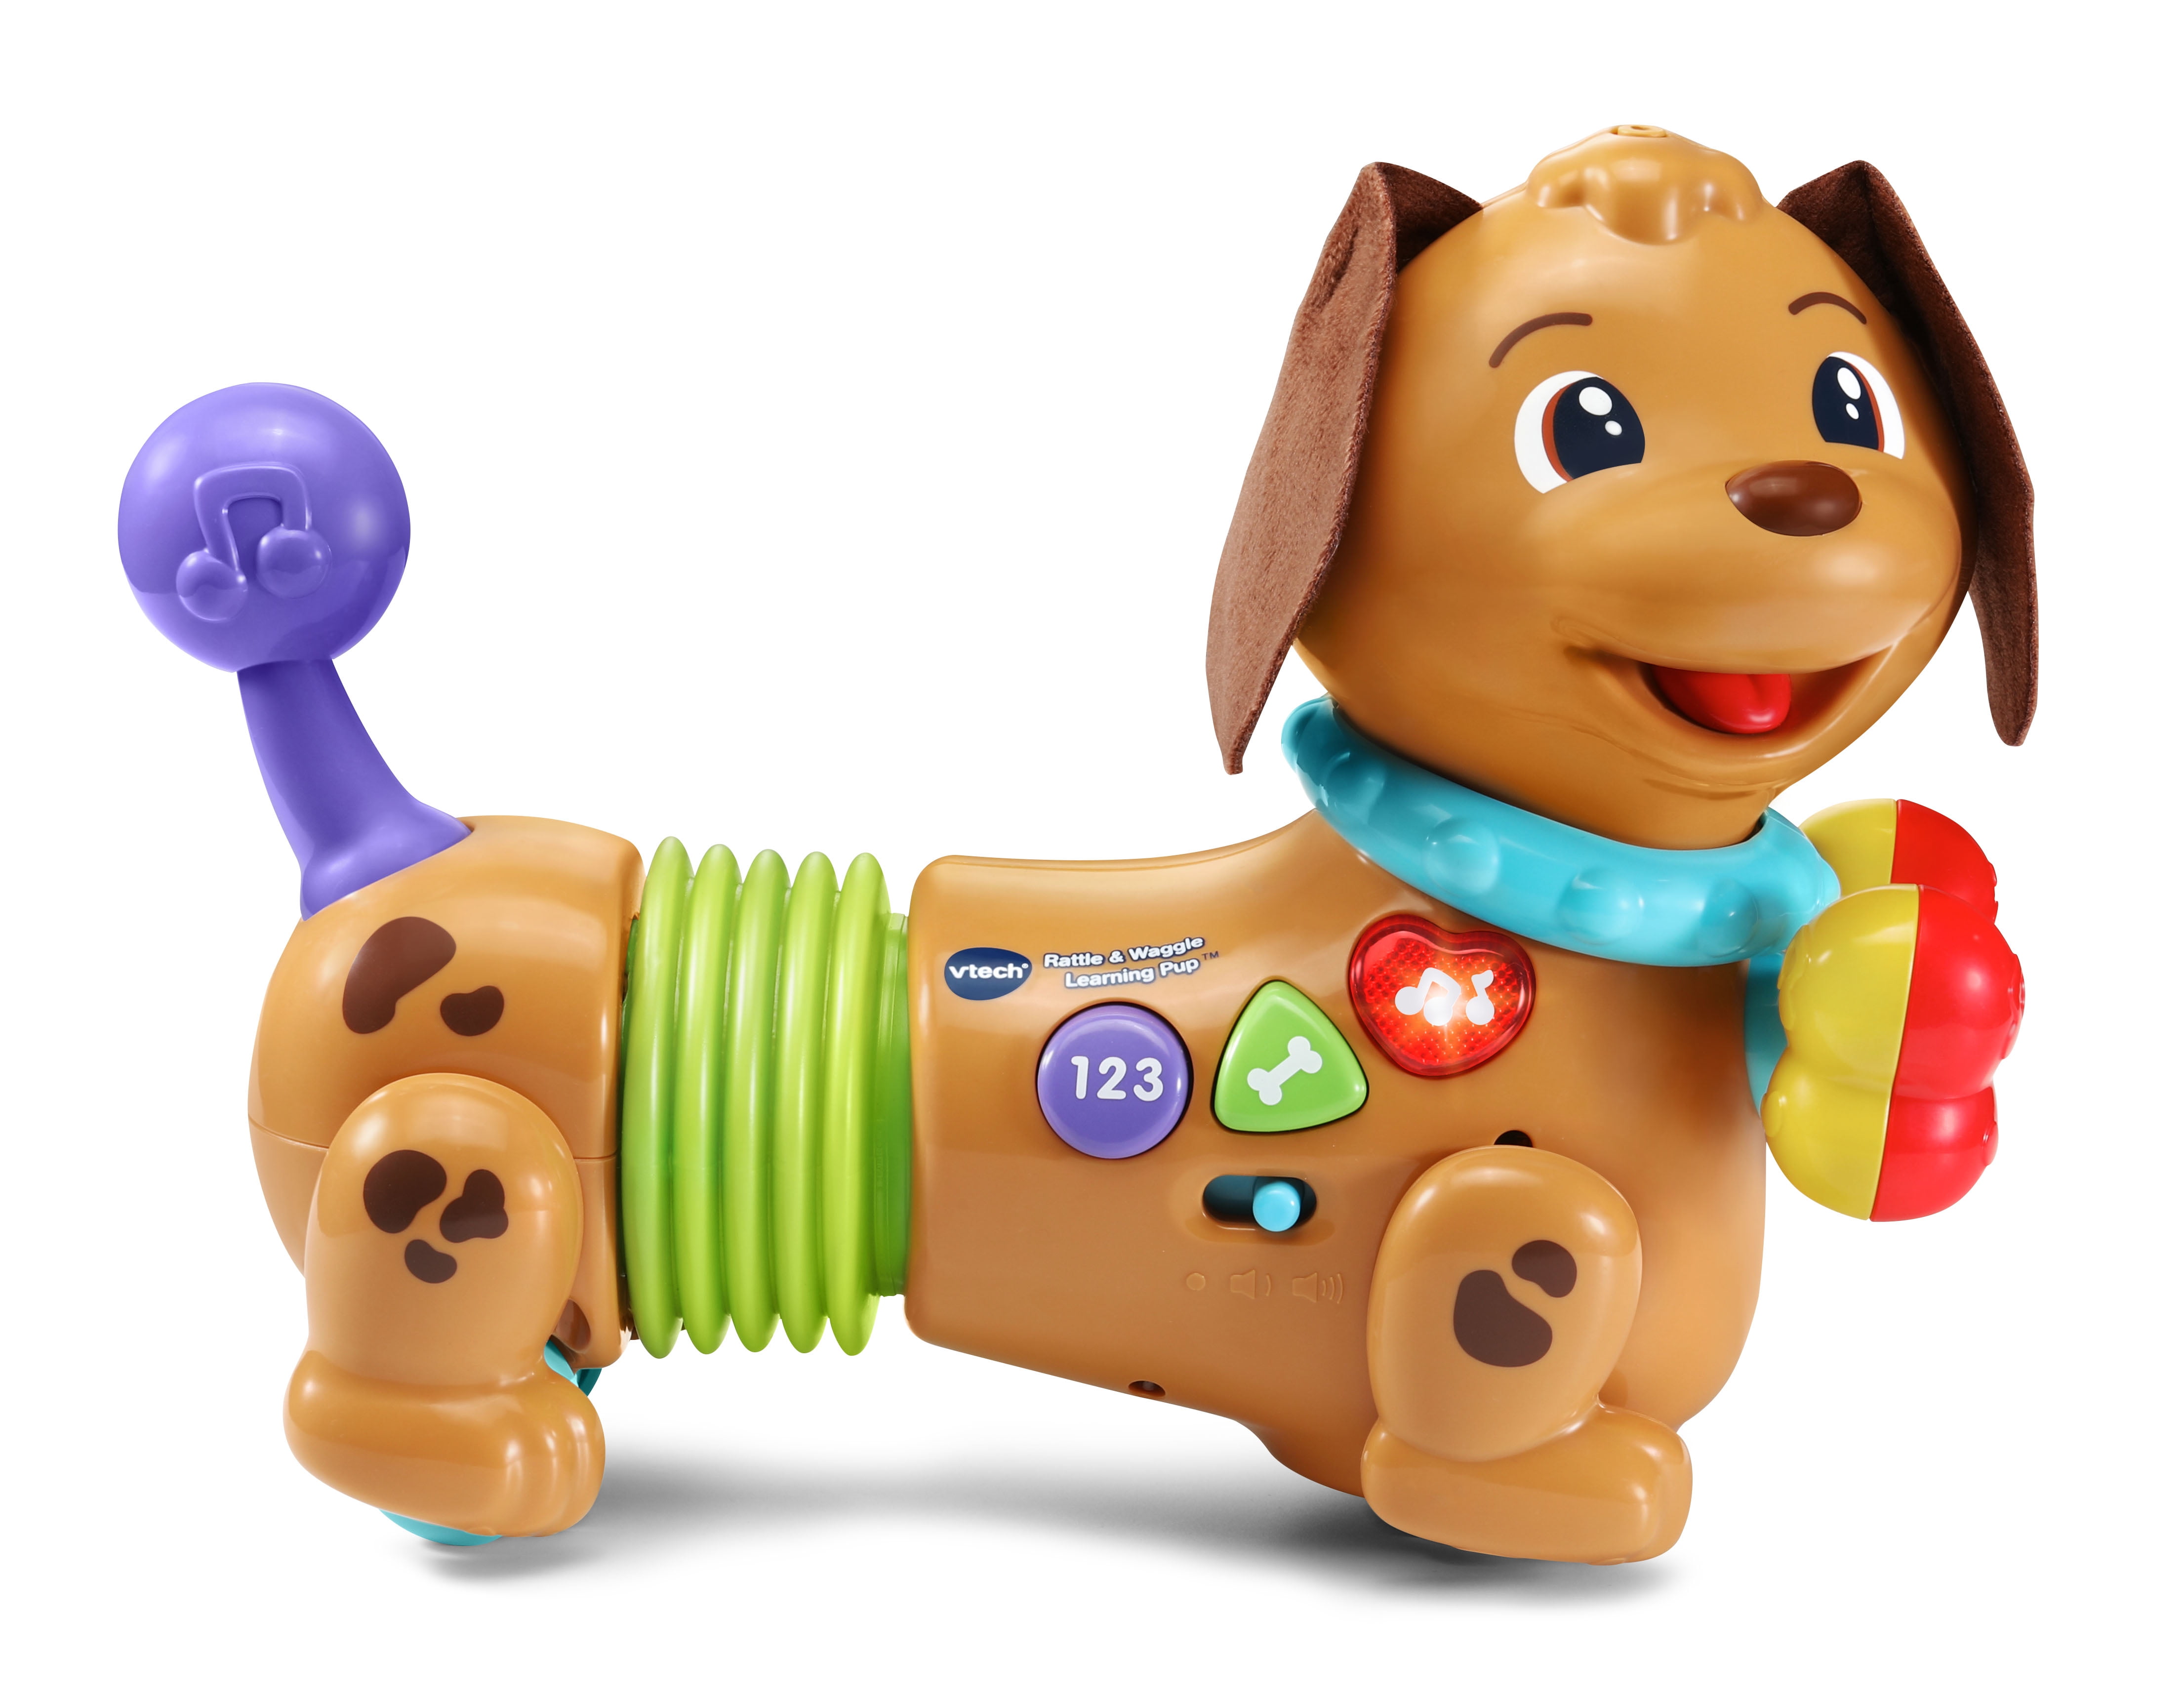 Vtech Rattle And Waggle Learning Pup Learning Toy For Toddlers Walmart Com Walmart Com,Cucumber Martini Hendricks